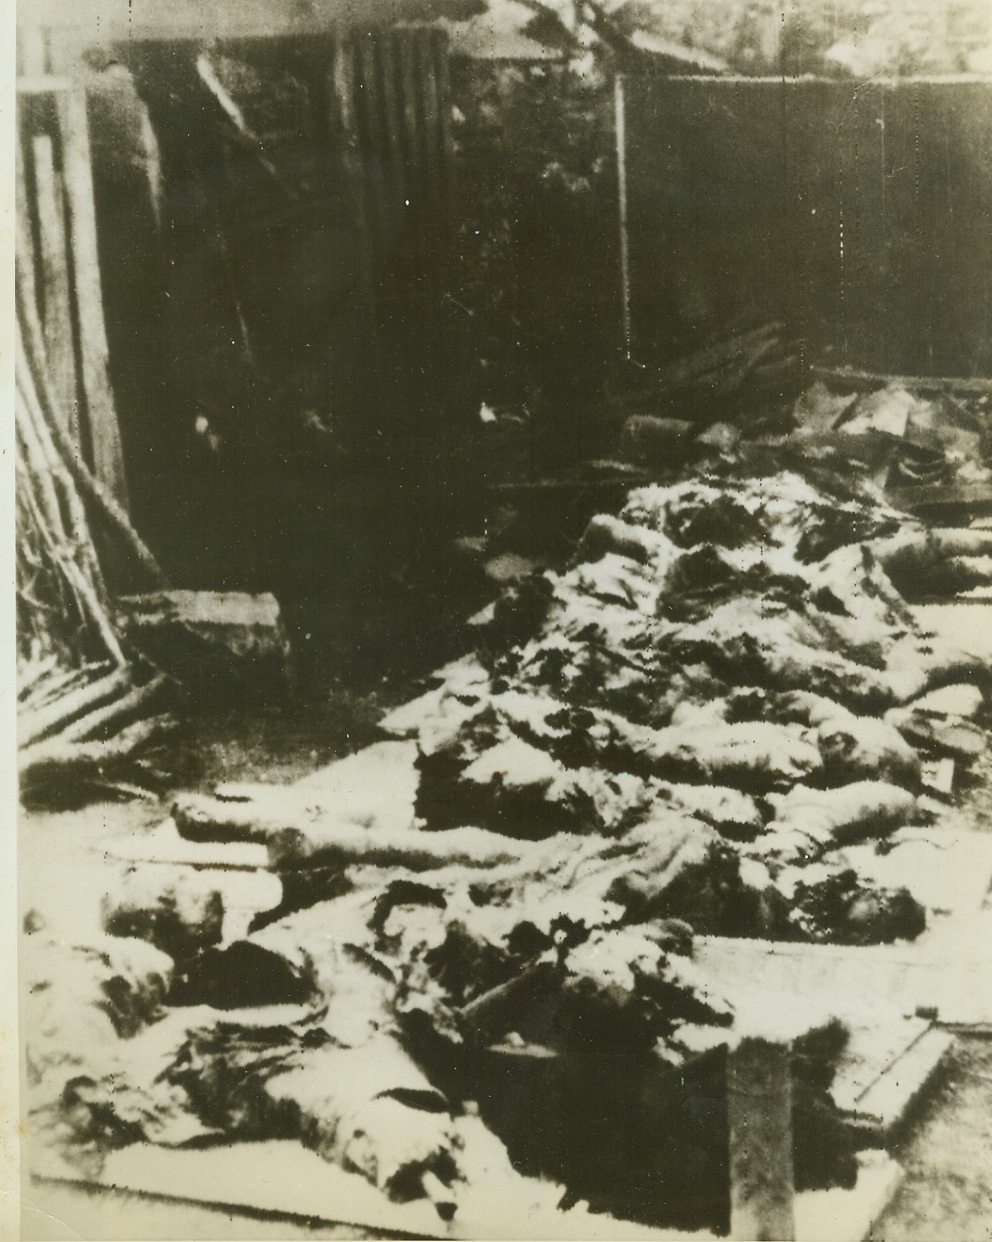 Nazis Make French Town Another Lidice, 7/22/1944. France—In this radiophoto smuggled out of occupied France and received in New York from London tonight, badly mutilated bodies of civilians of Oradour, France, give evidence of the Nazi terrorism which turned the town into another lidice. As Allied liberators advance relentlessly inland, Nazis resort more and more in desperation to ruthless destruction of land, property, and human lives.  Credit: ACME radiophoto;